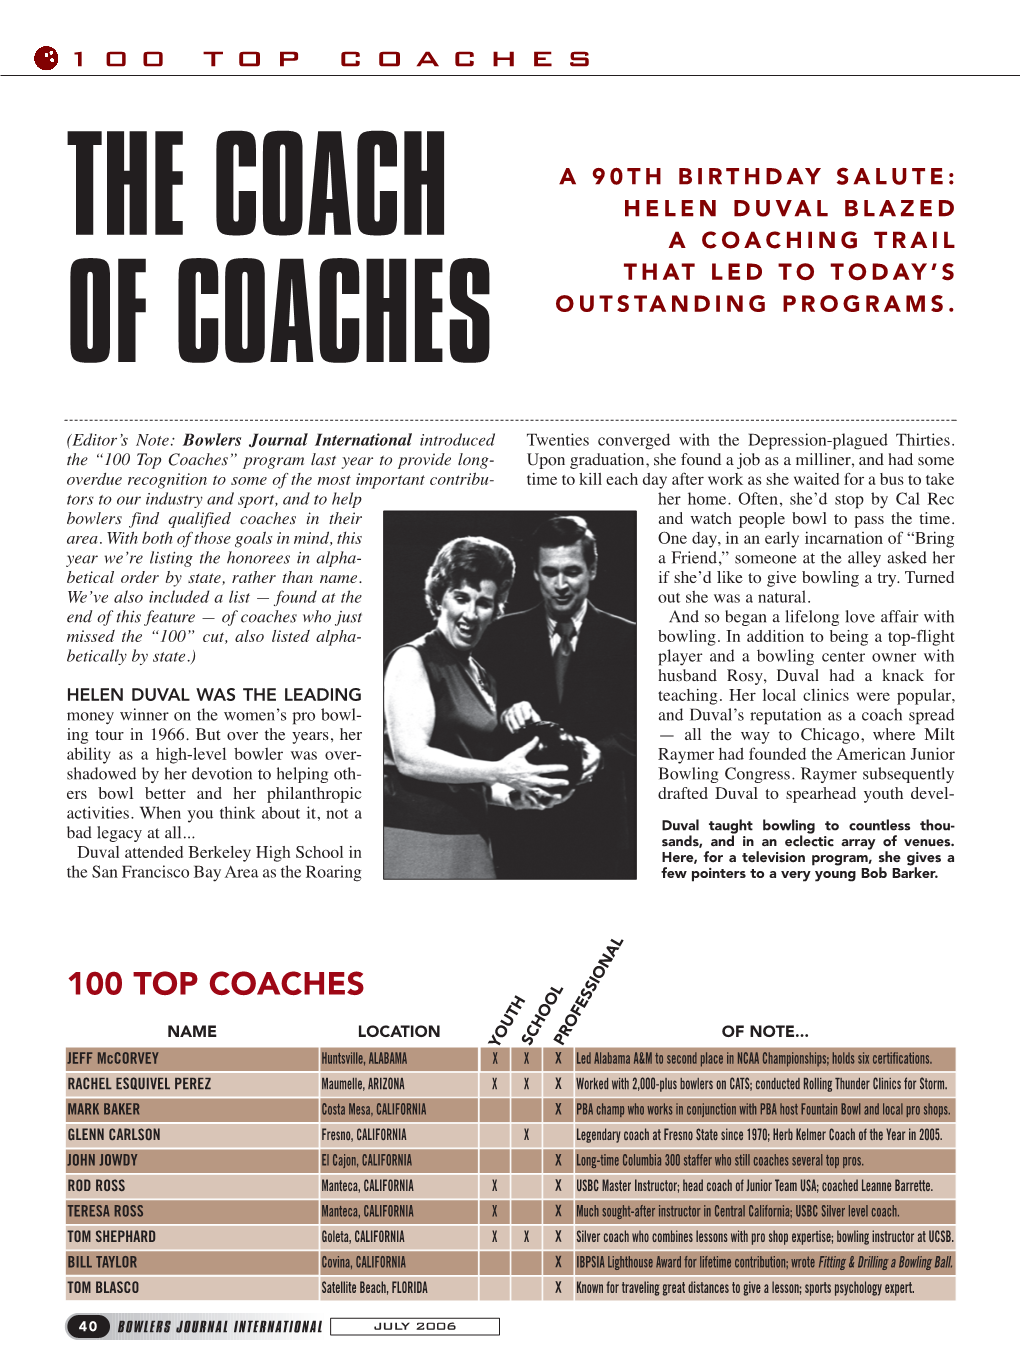 Top Coaches P40-43 7/26/06 8:41 AM Page 40